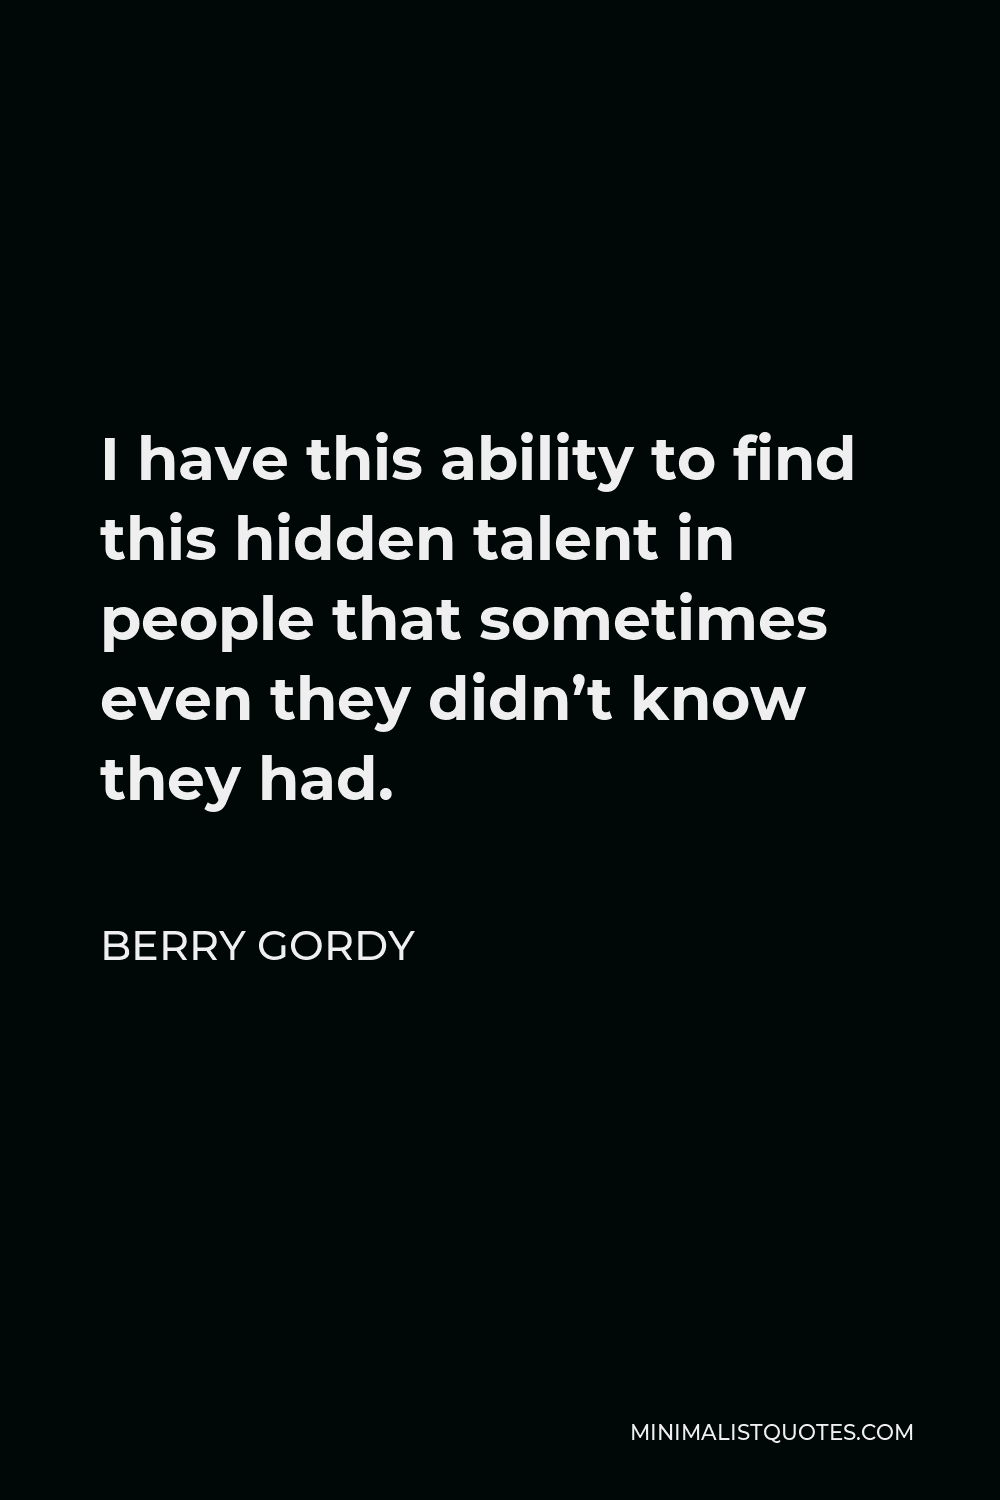 Berry Gordy Quote - I have this ability to find this hidden talent in people that sometimes even they didn’t know they had.